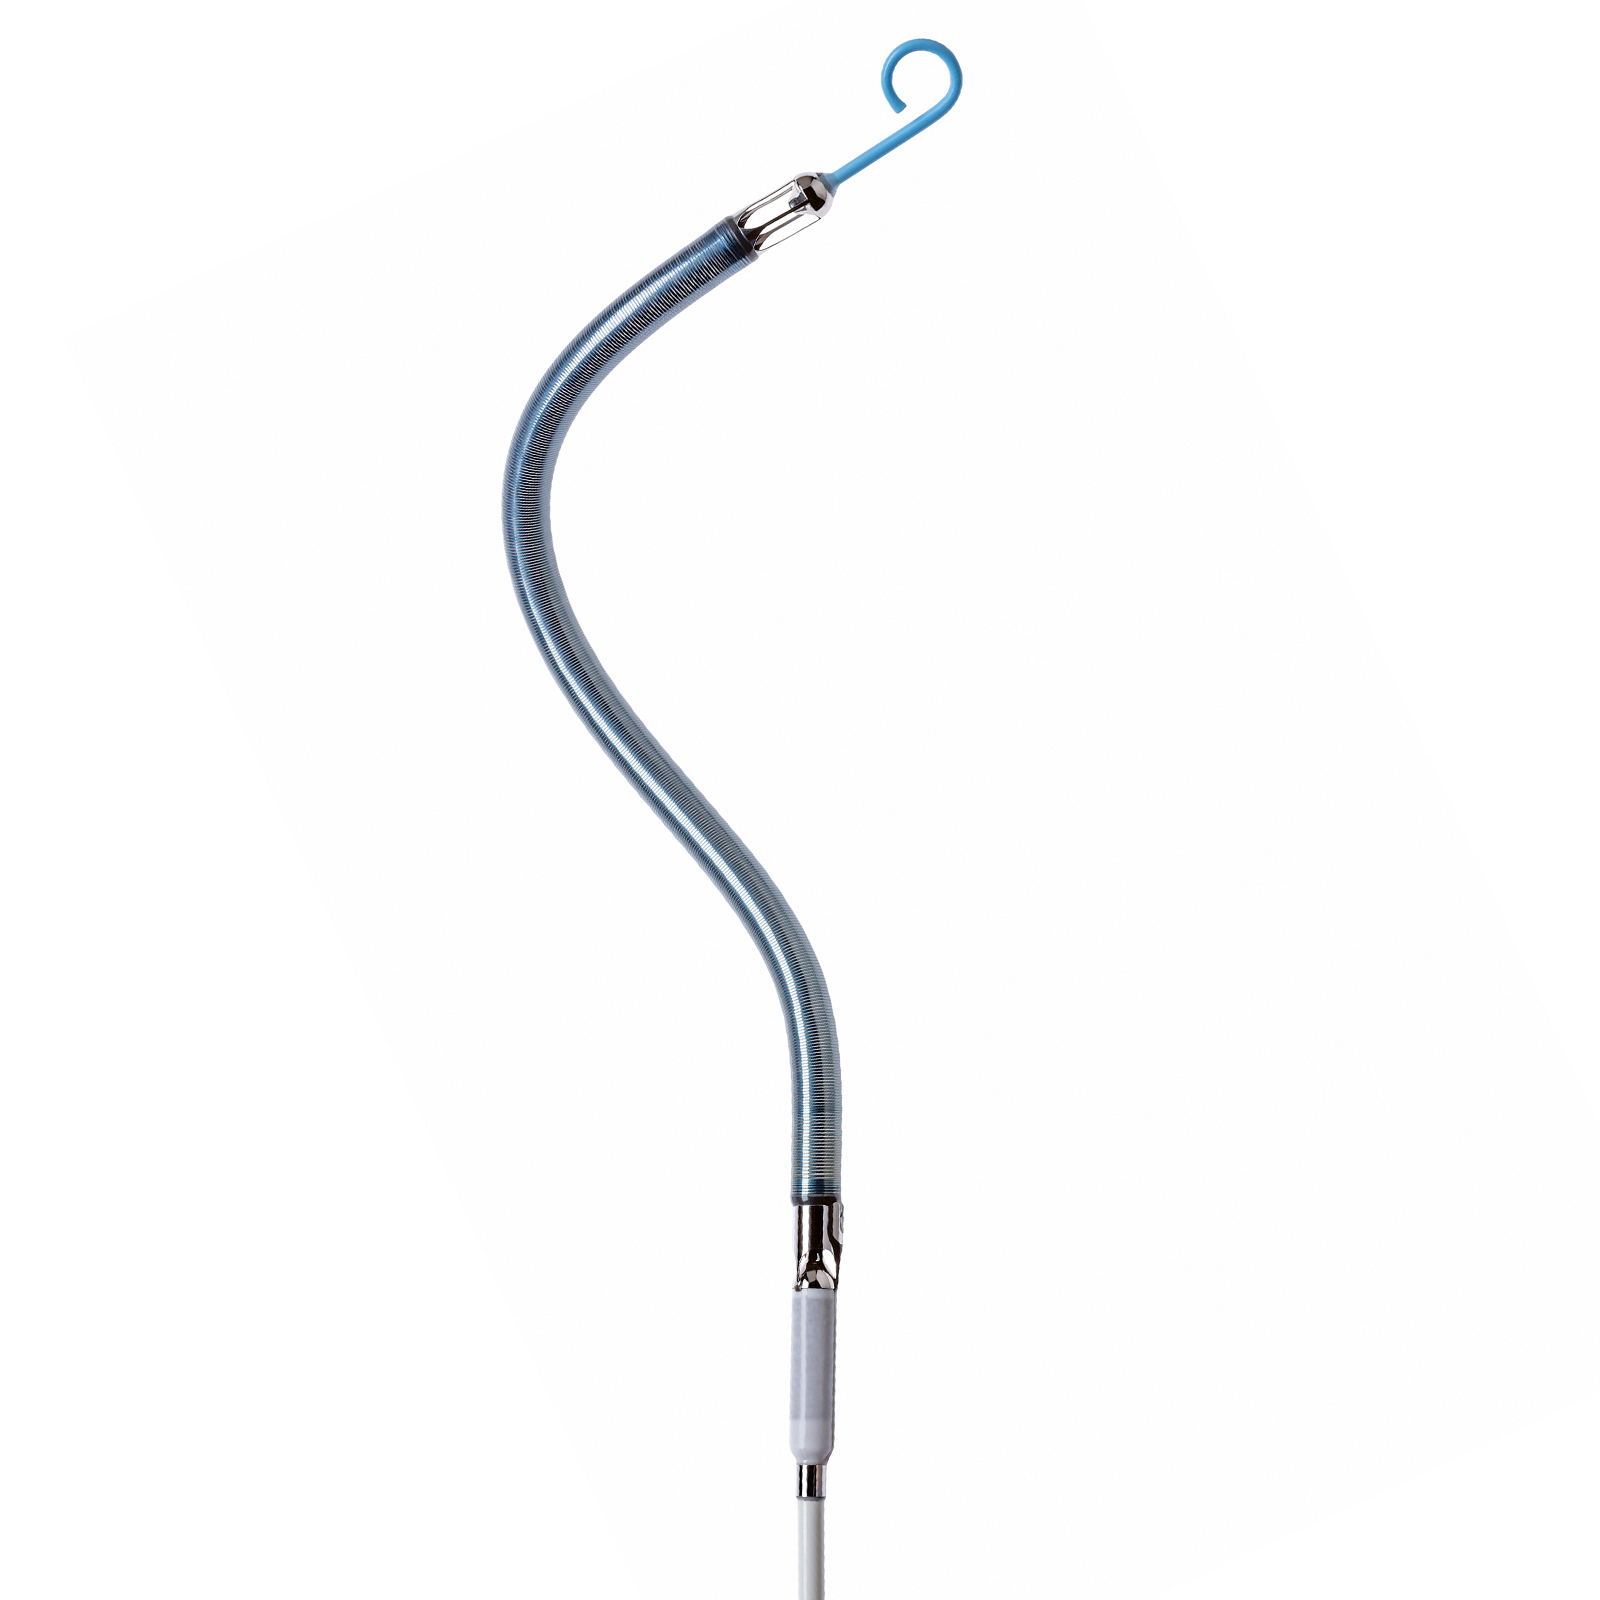 Fda Issues Emergency Use Authorization For Impella Rp As Therapy For